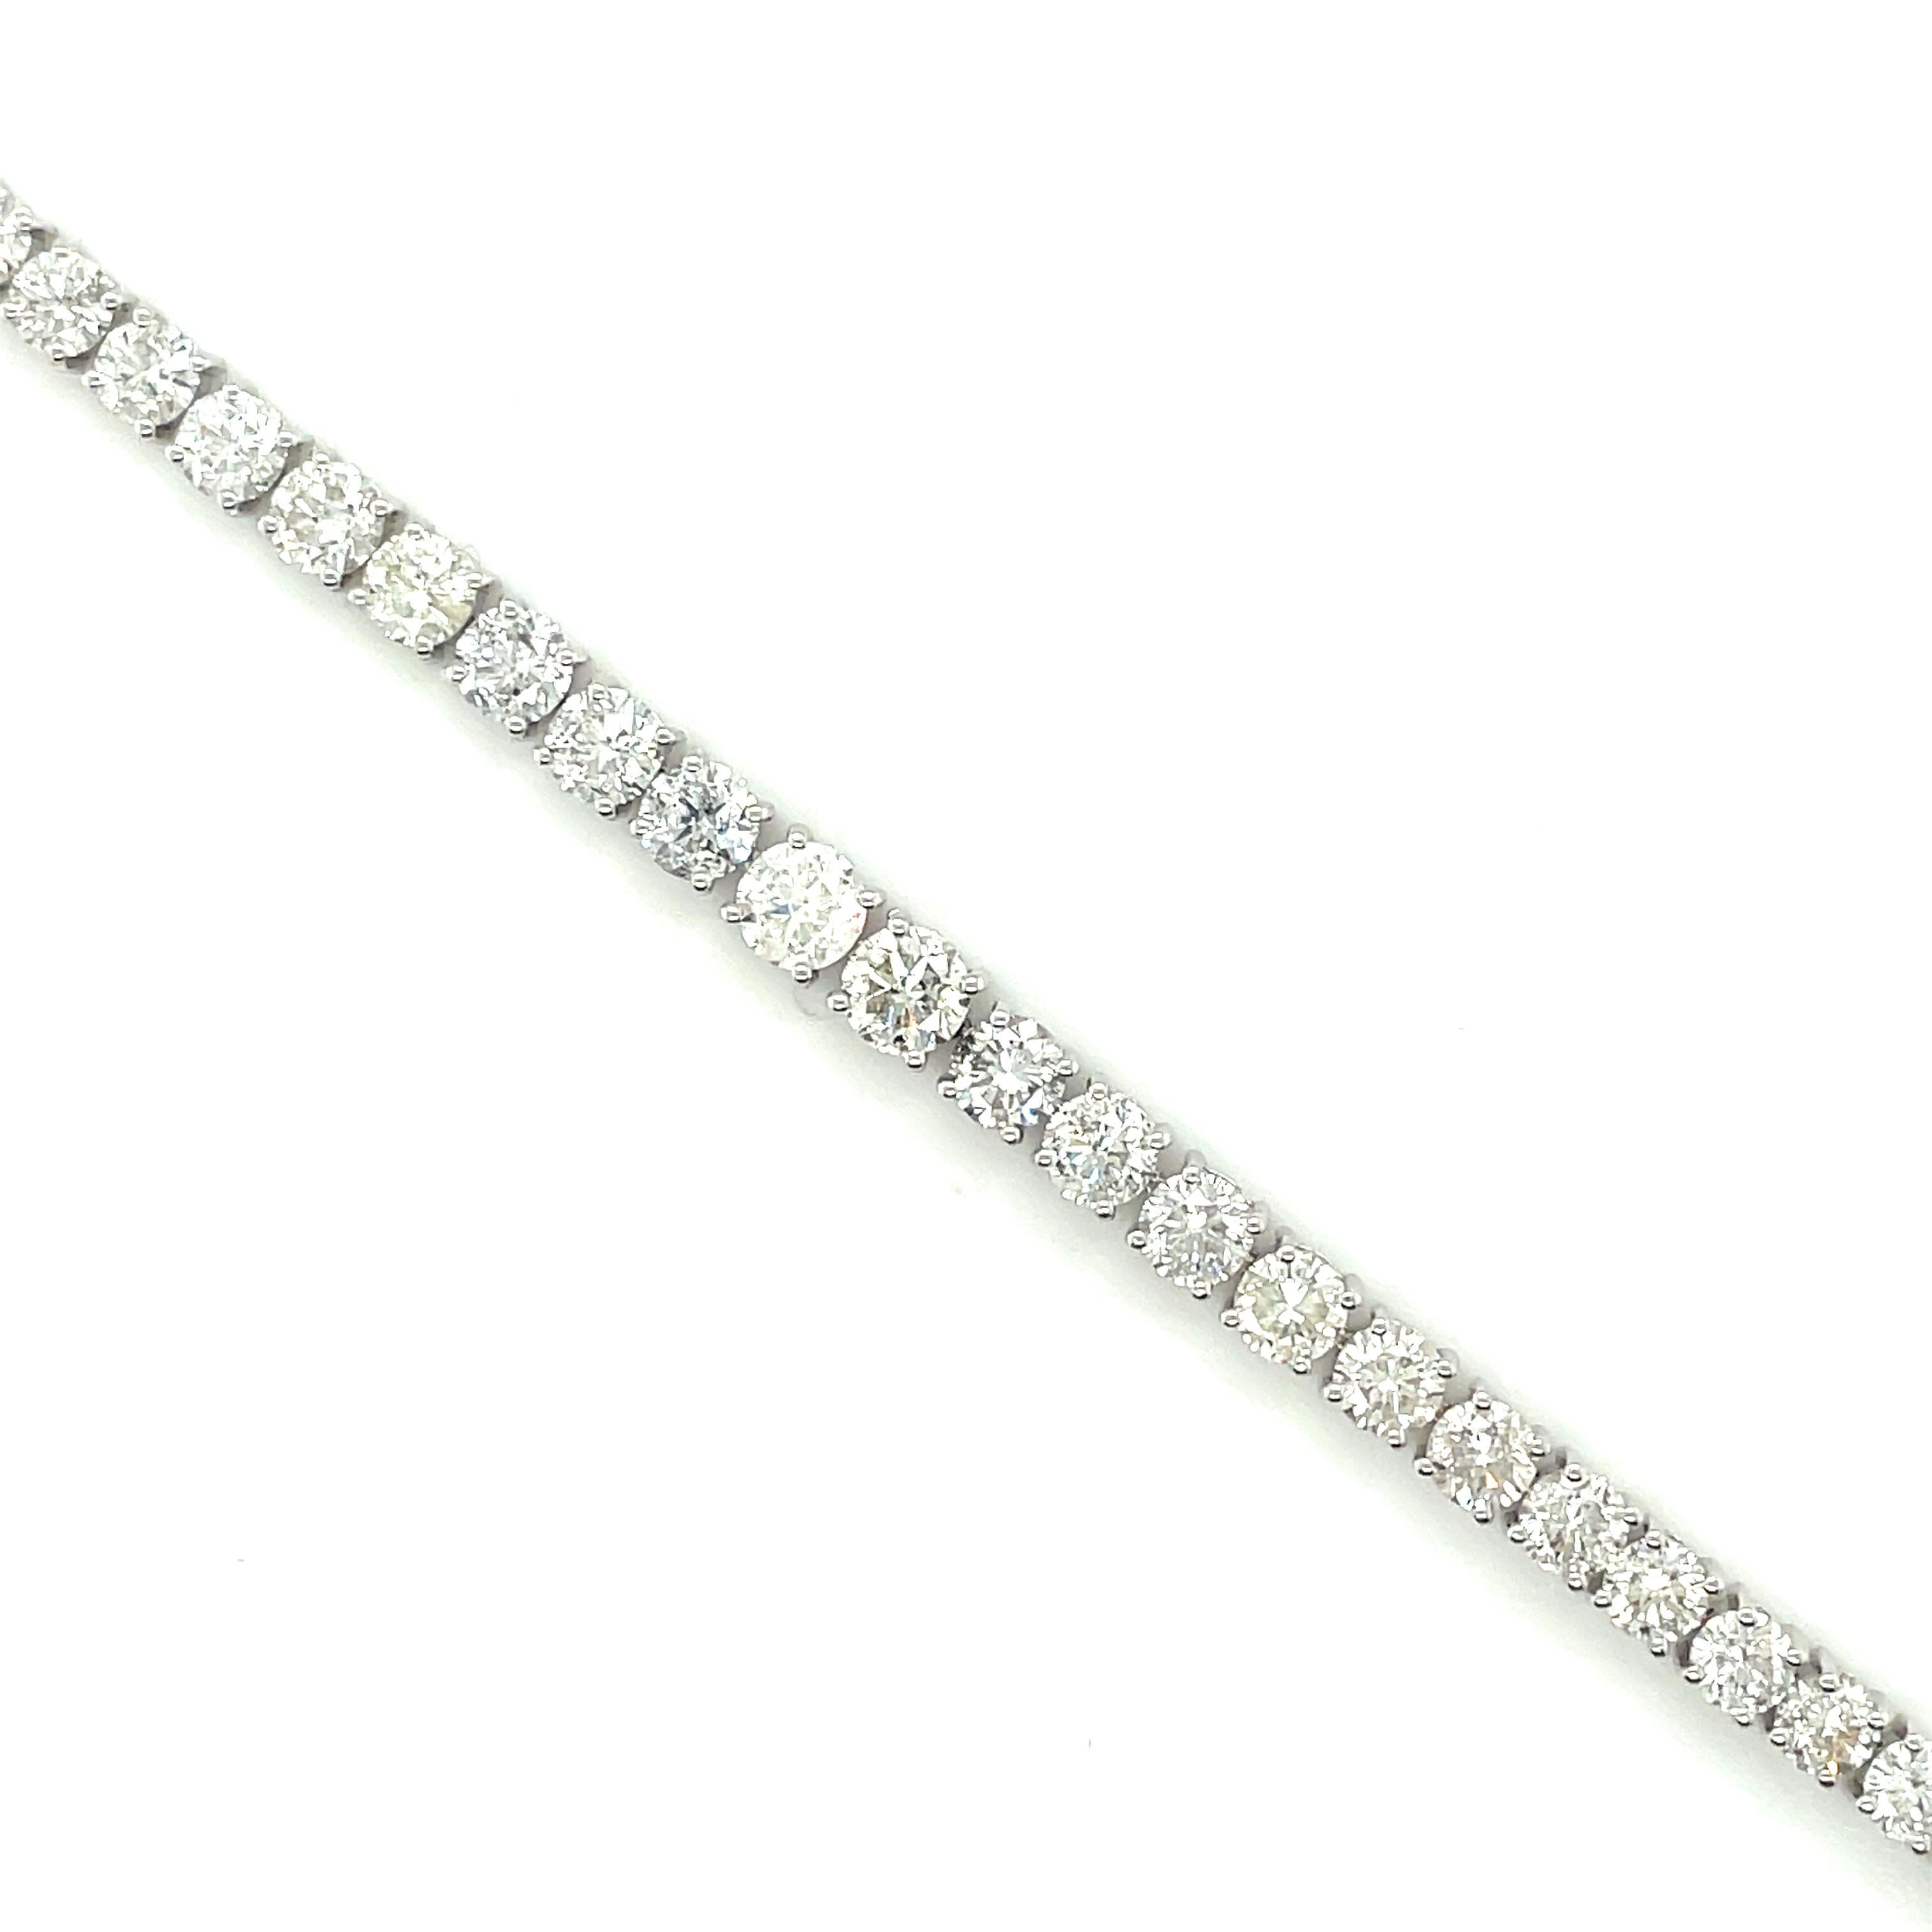 14K White Gold Diamond Bracelet

One polished, and tested, 14K white gold bracelet mounted with 46 genuine round diamonds weighing approximately  9.35 carats. The bracelet measures 7 inches in length and is finished with a tension lock clasp and